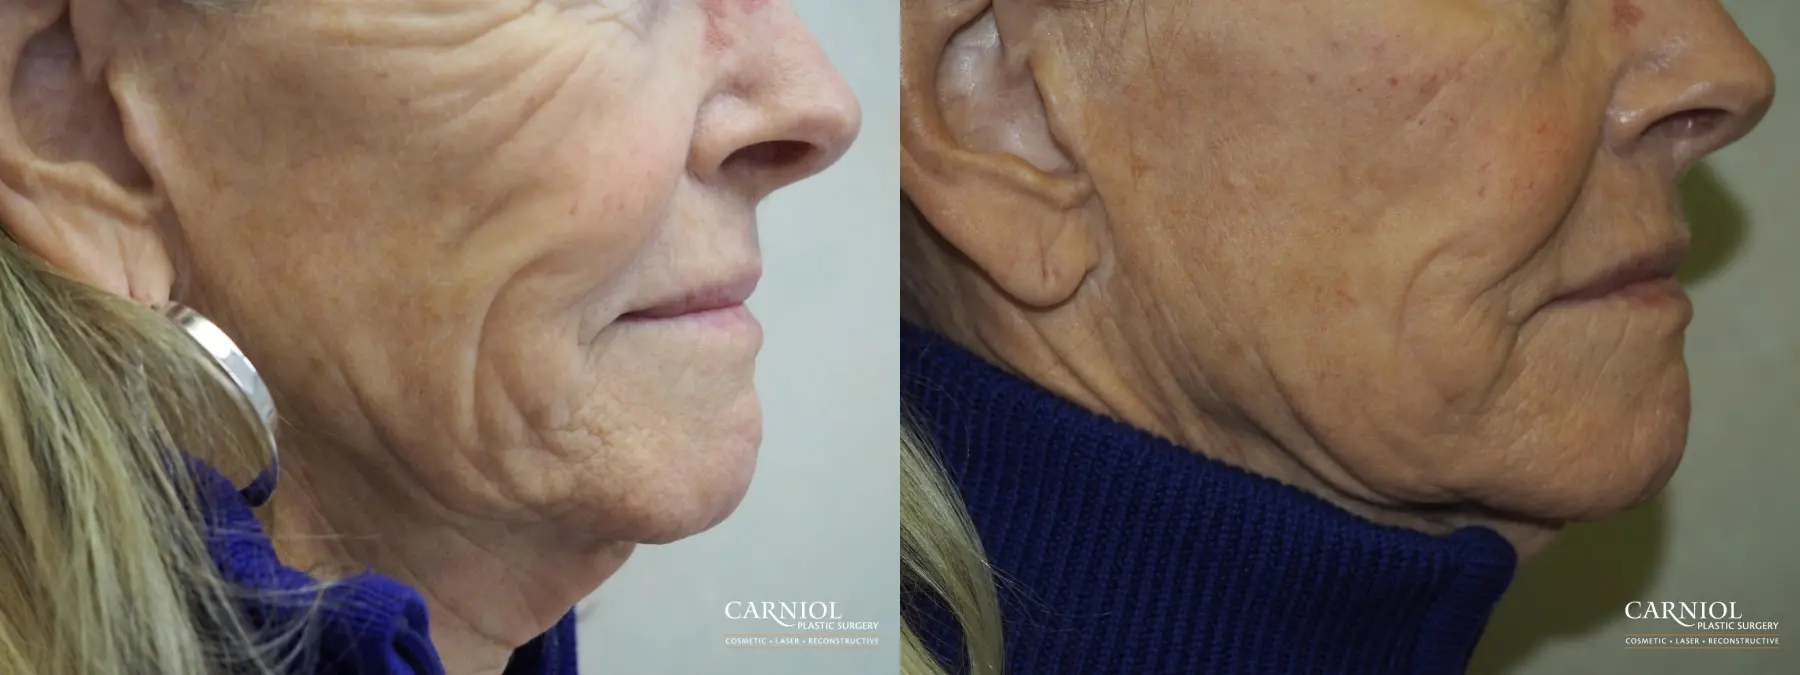 Non-Surgical Mini-Facelift: Patient 6 - Before and After  